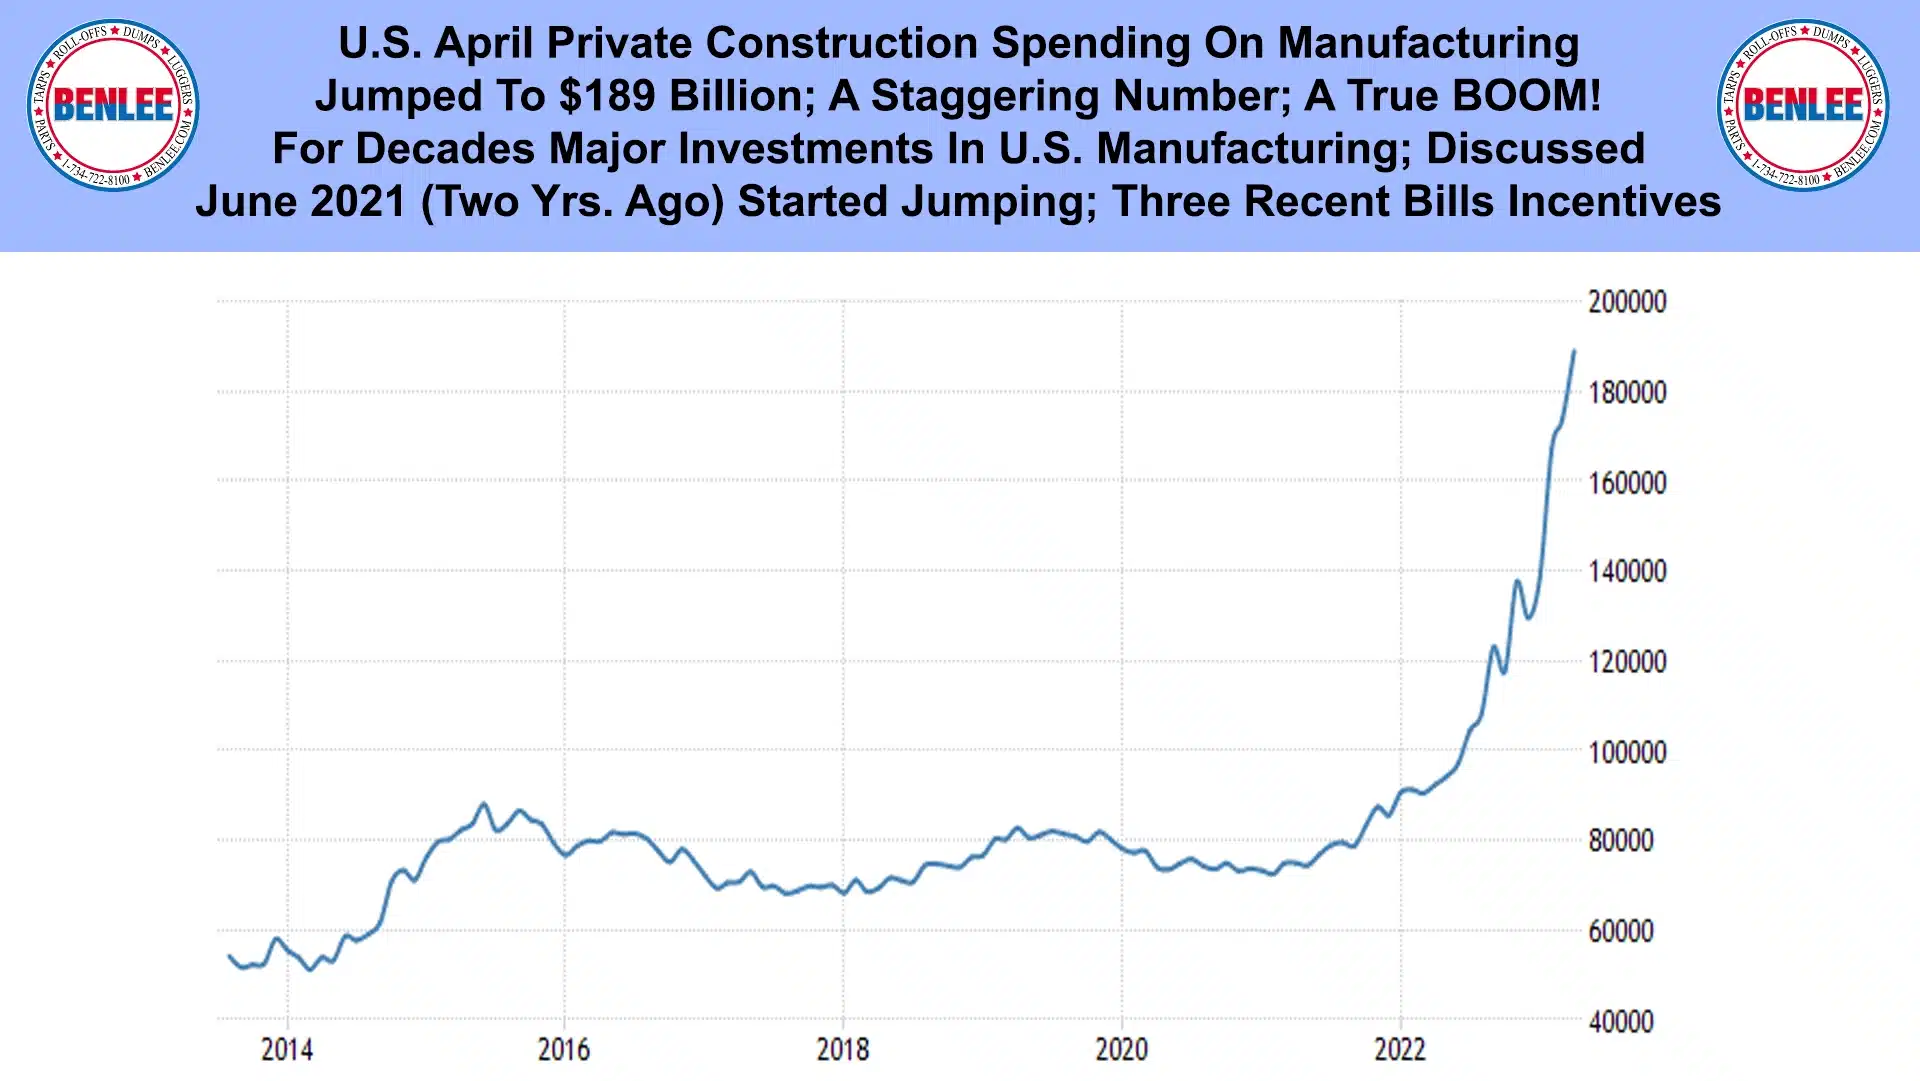 U.S. April Private Construction Spending On Manufacturing